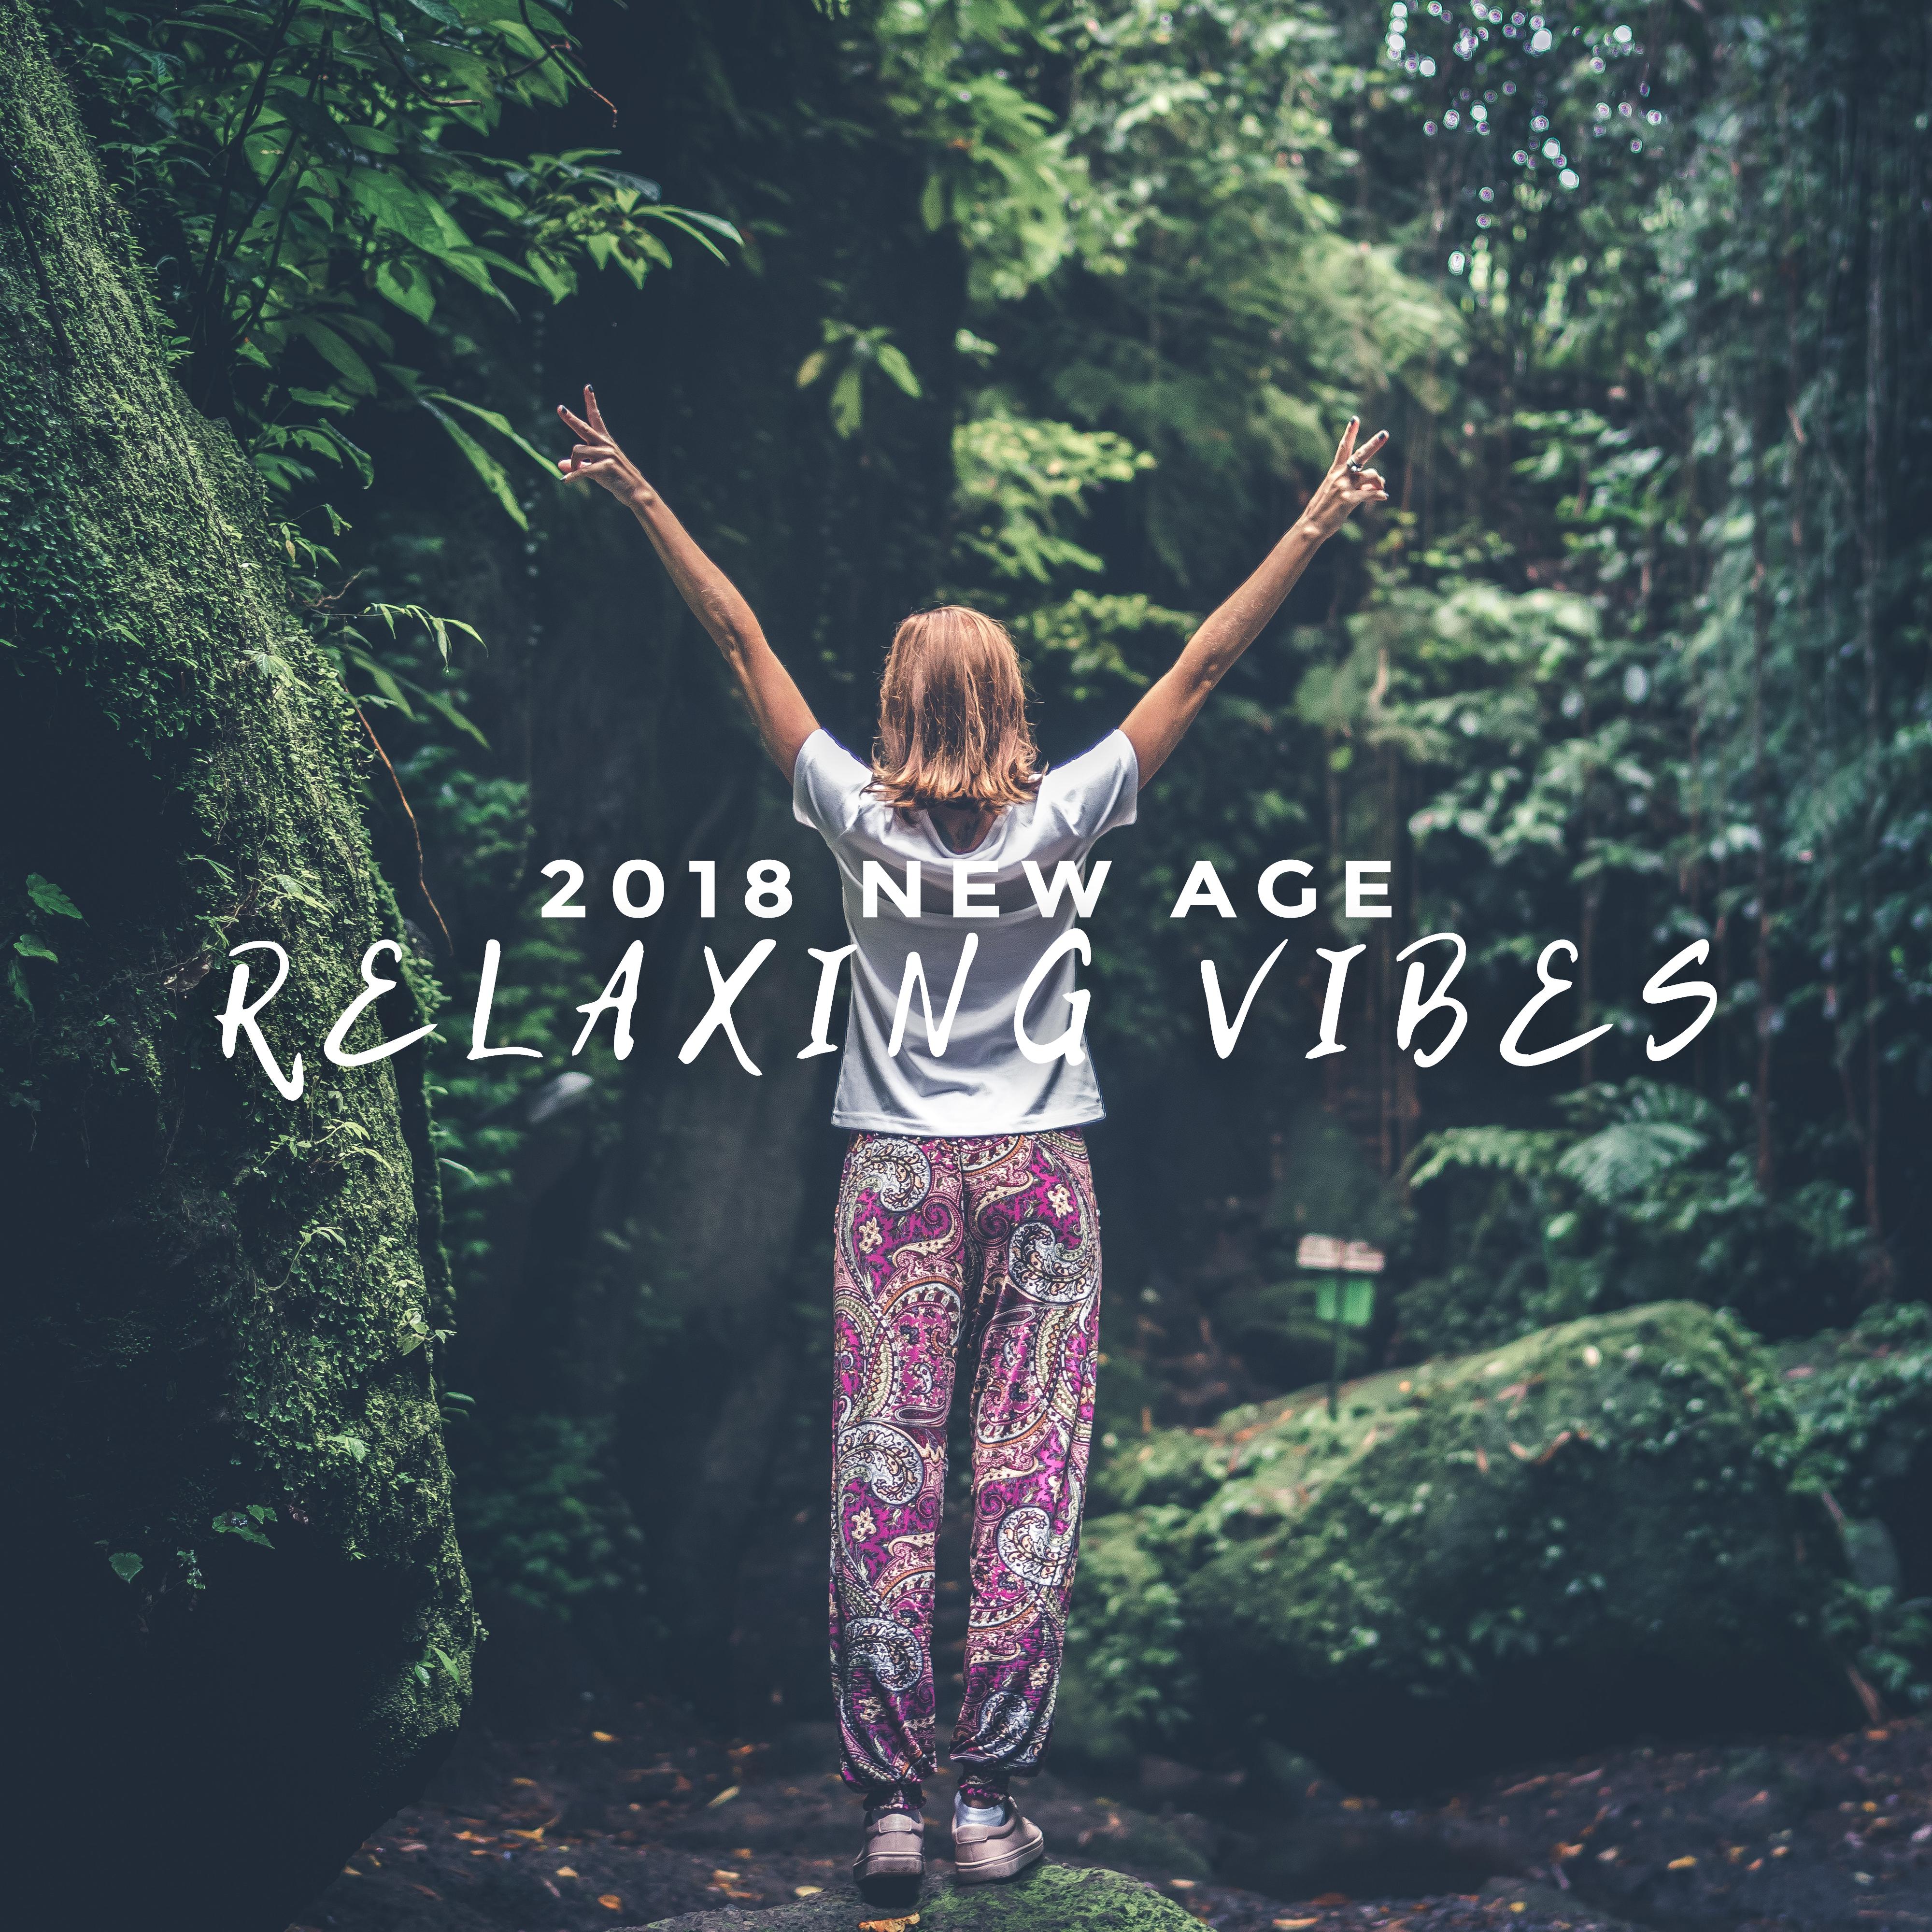 2018 New Age Relaxing Vibes